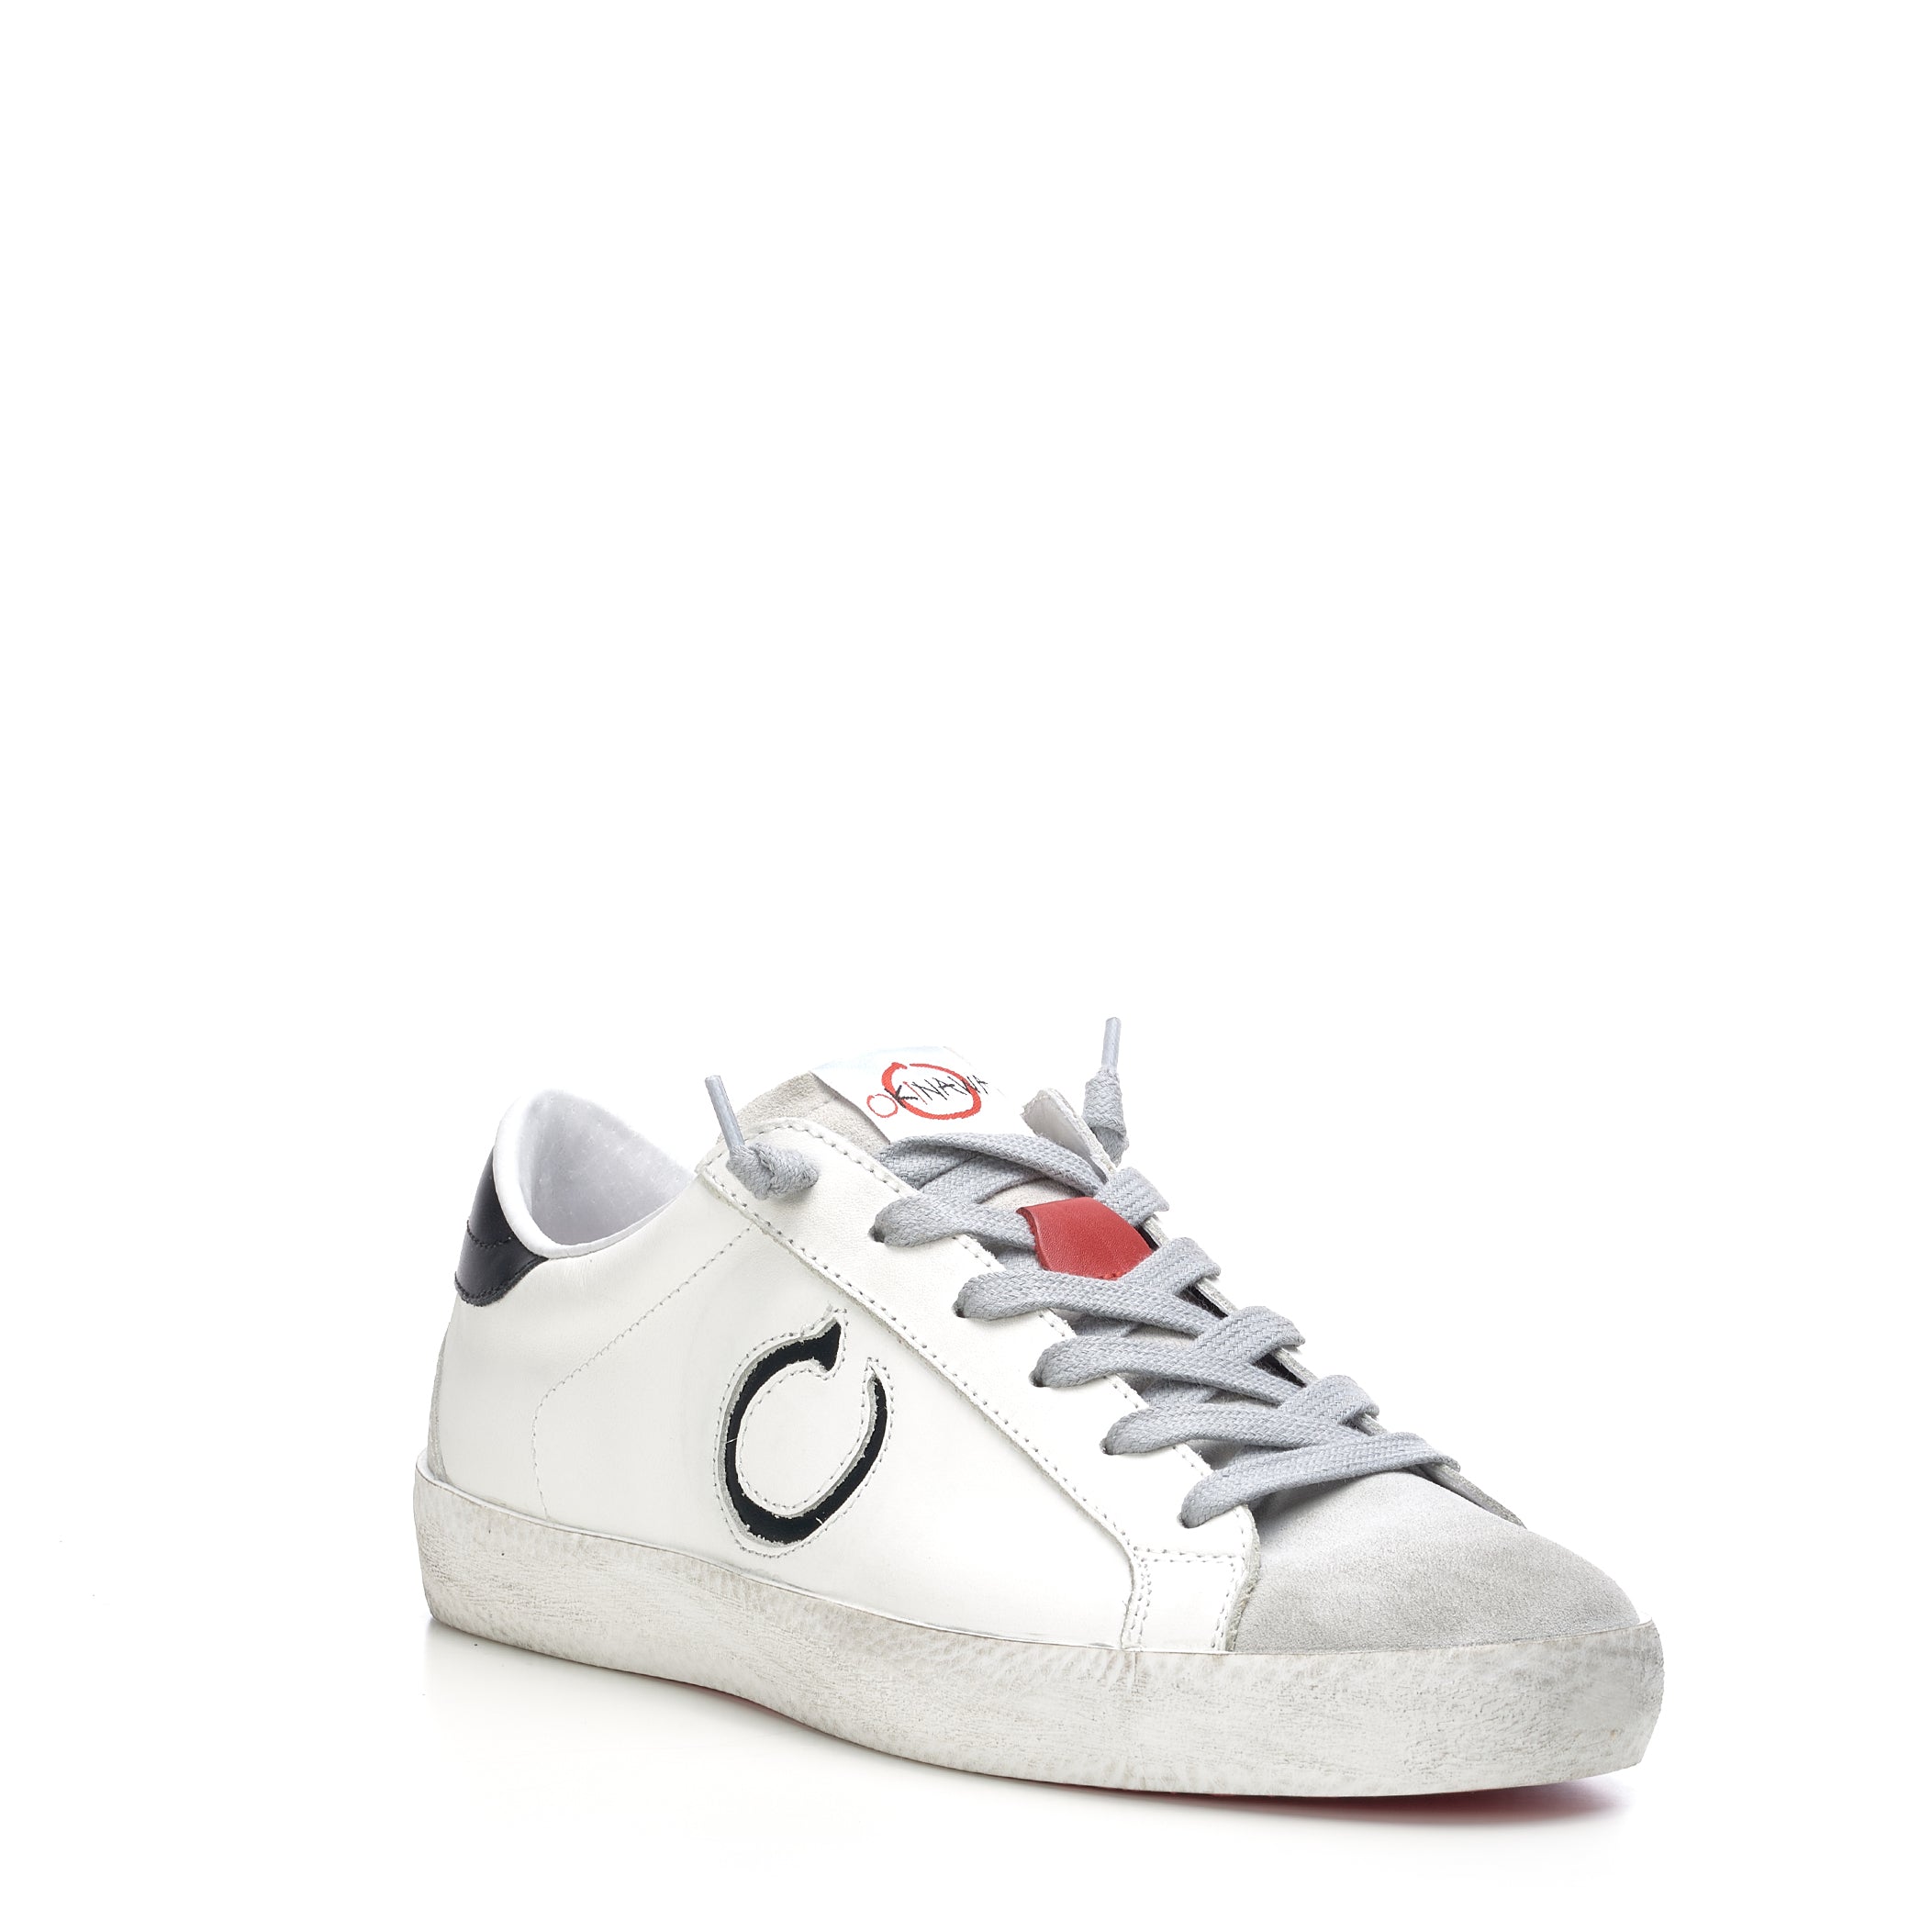 White sneakers with black logo